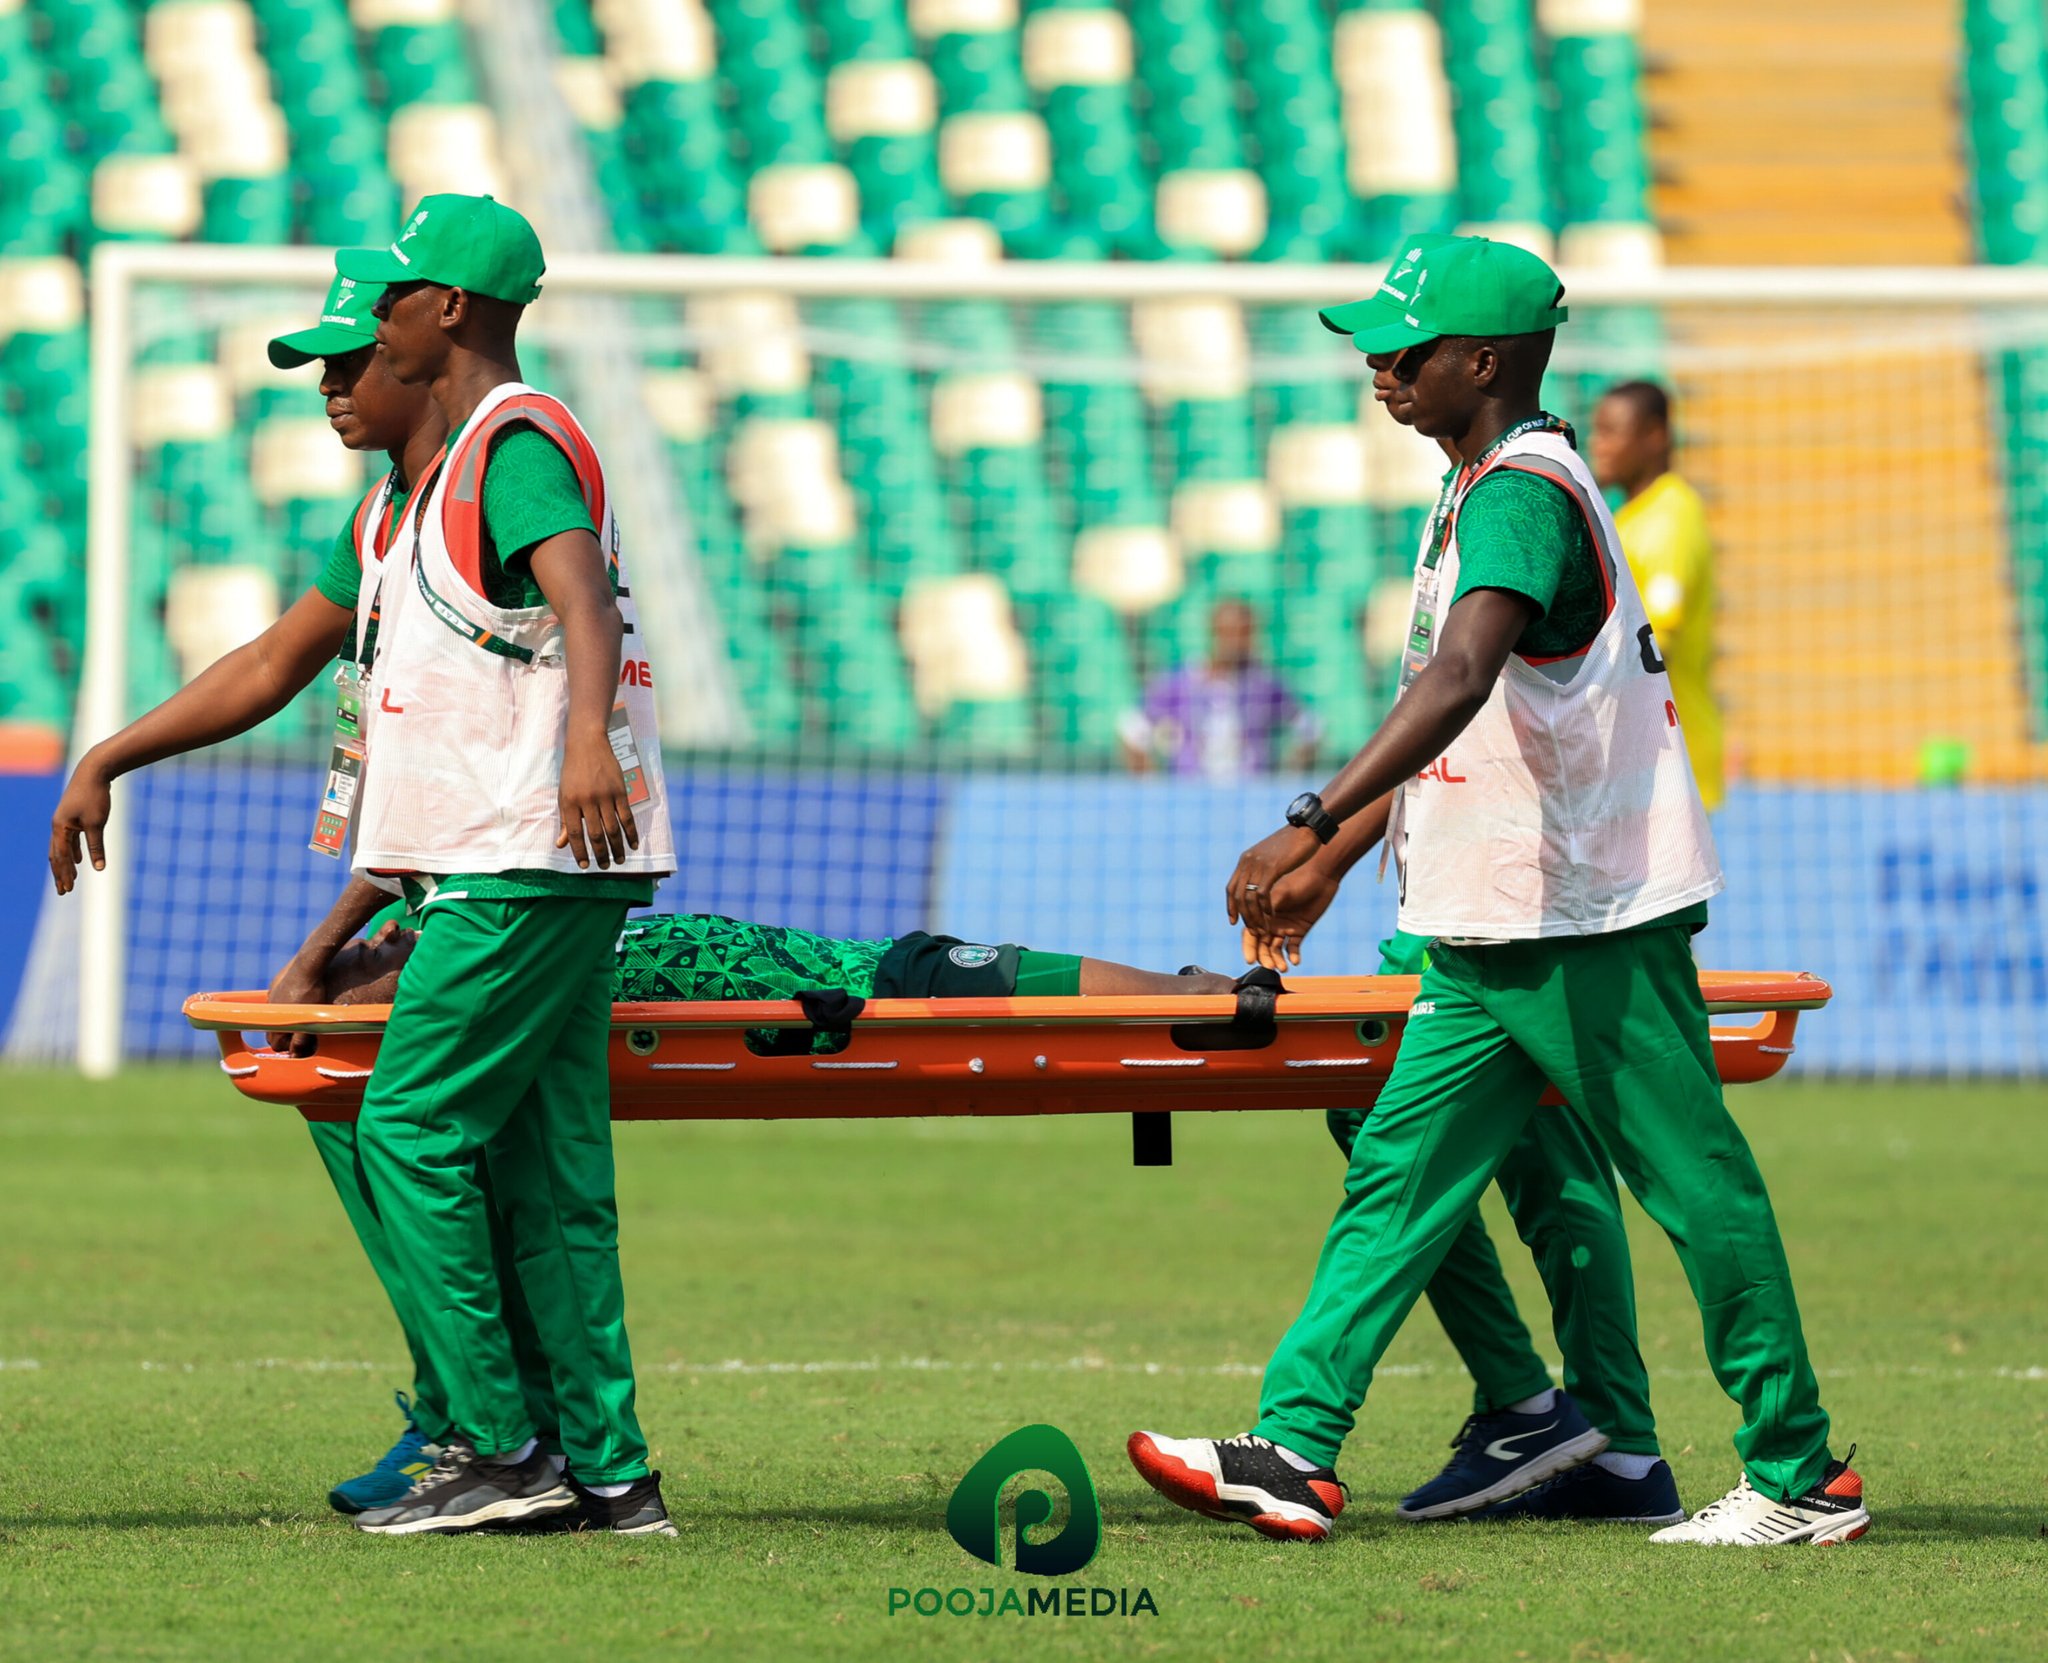 AFCON: Hopefully Alhassan Yusuf will be available for the next match - Jose Peseiro